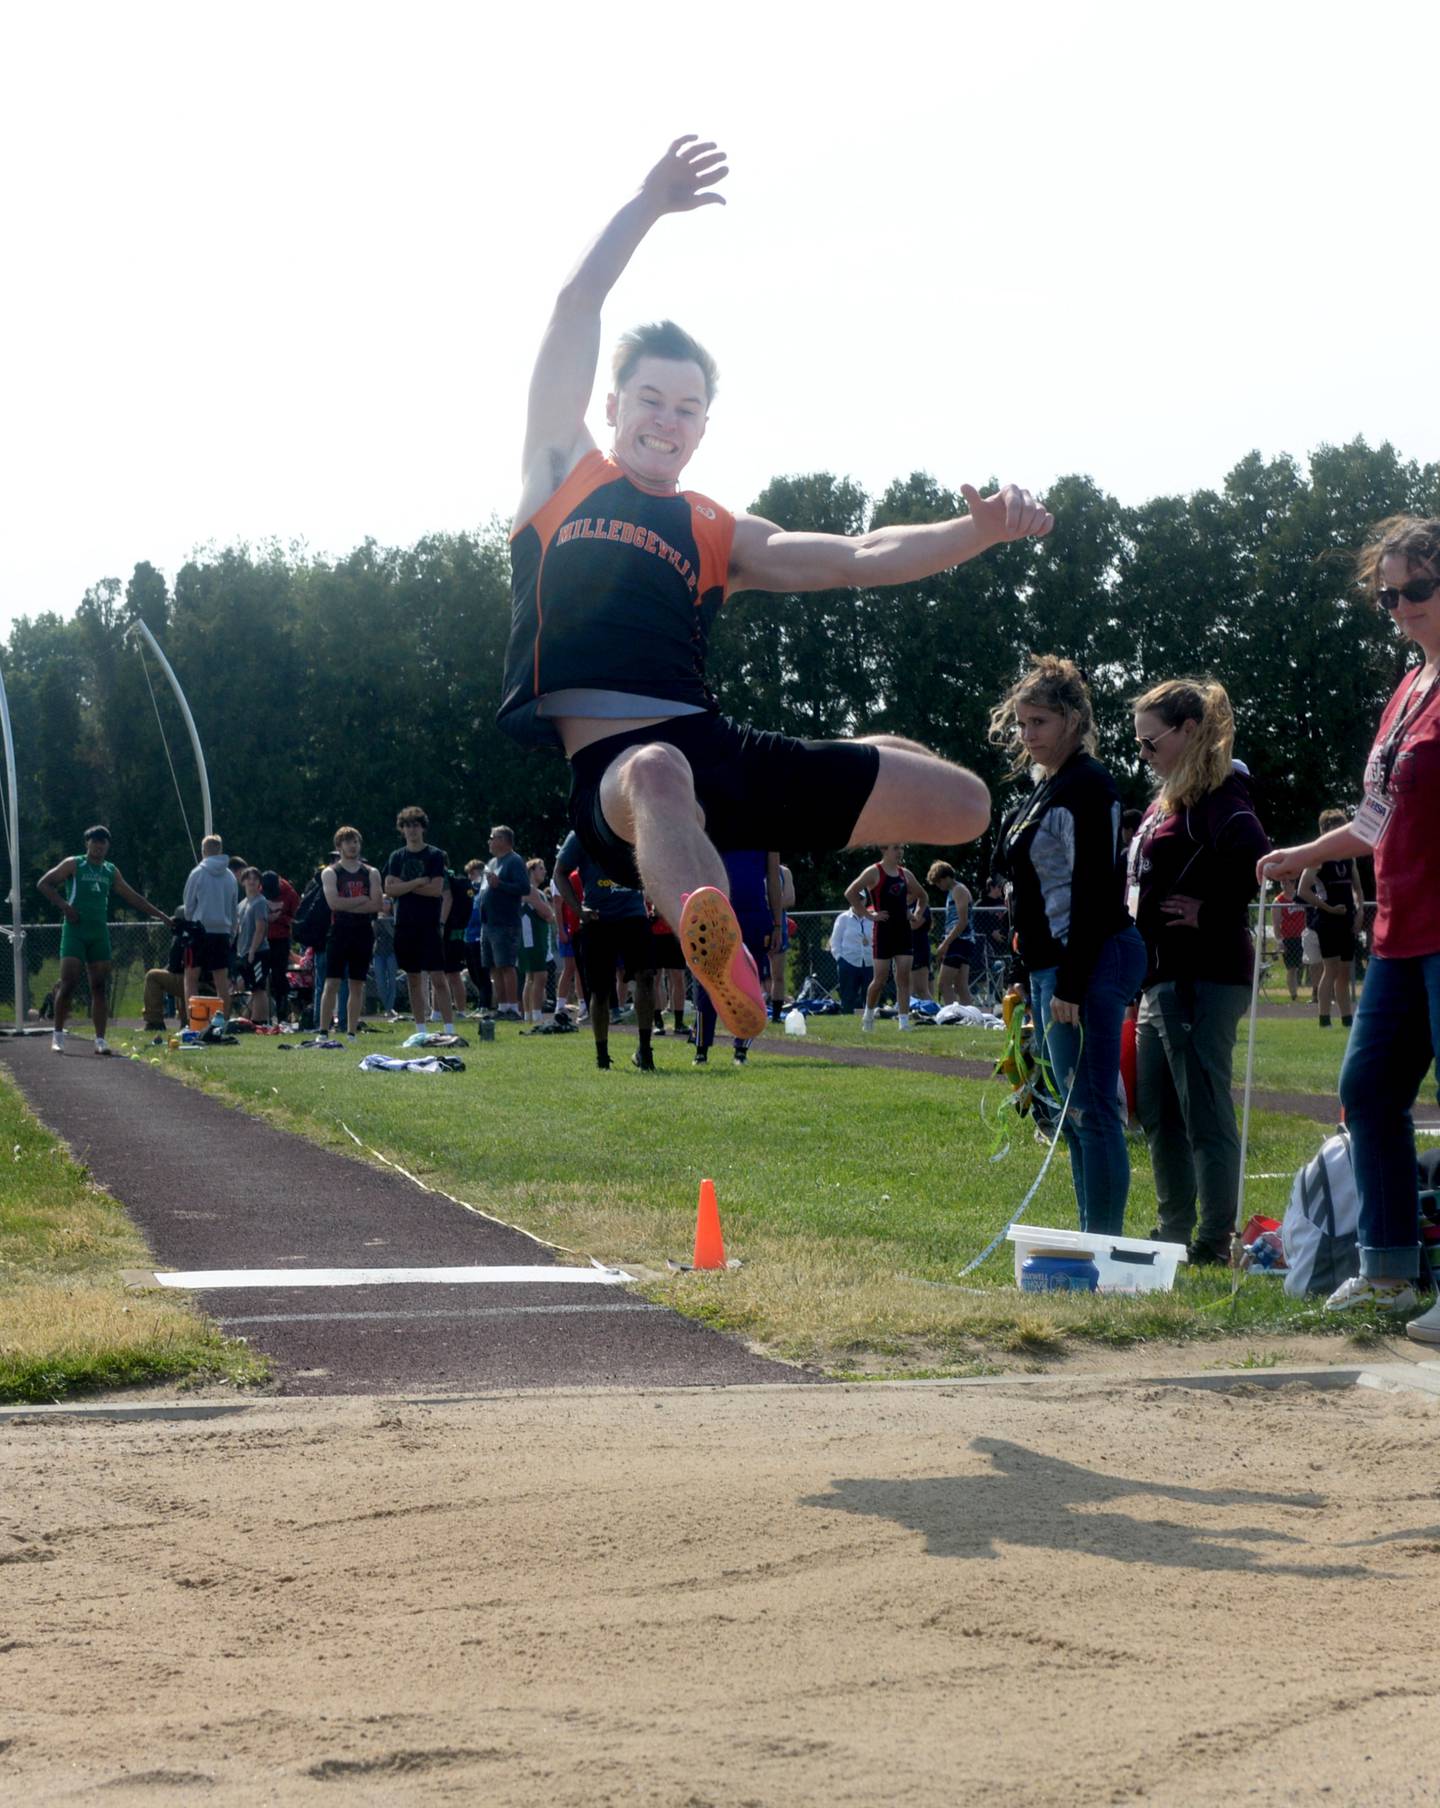 Milledgeville's Kolton Wilk long jumps at the1A Rockridge Sectional on Friday, May 19.